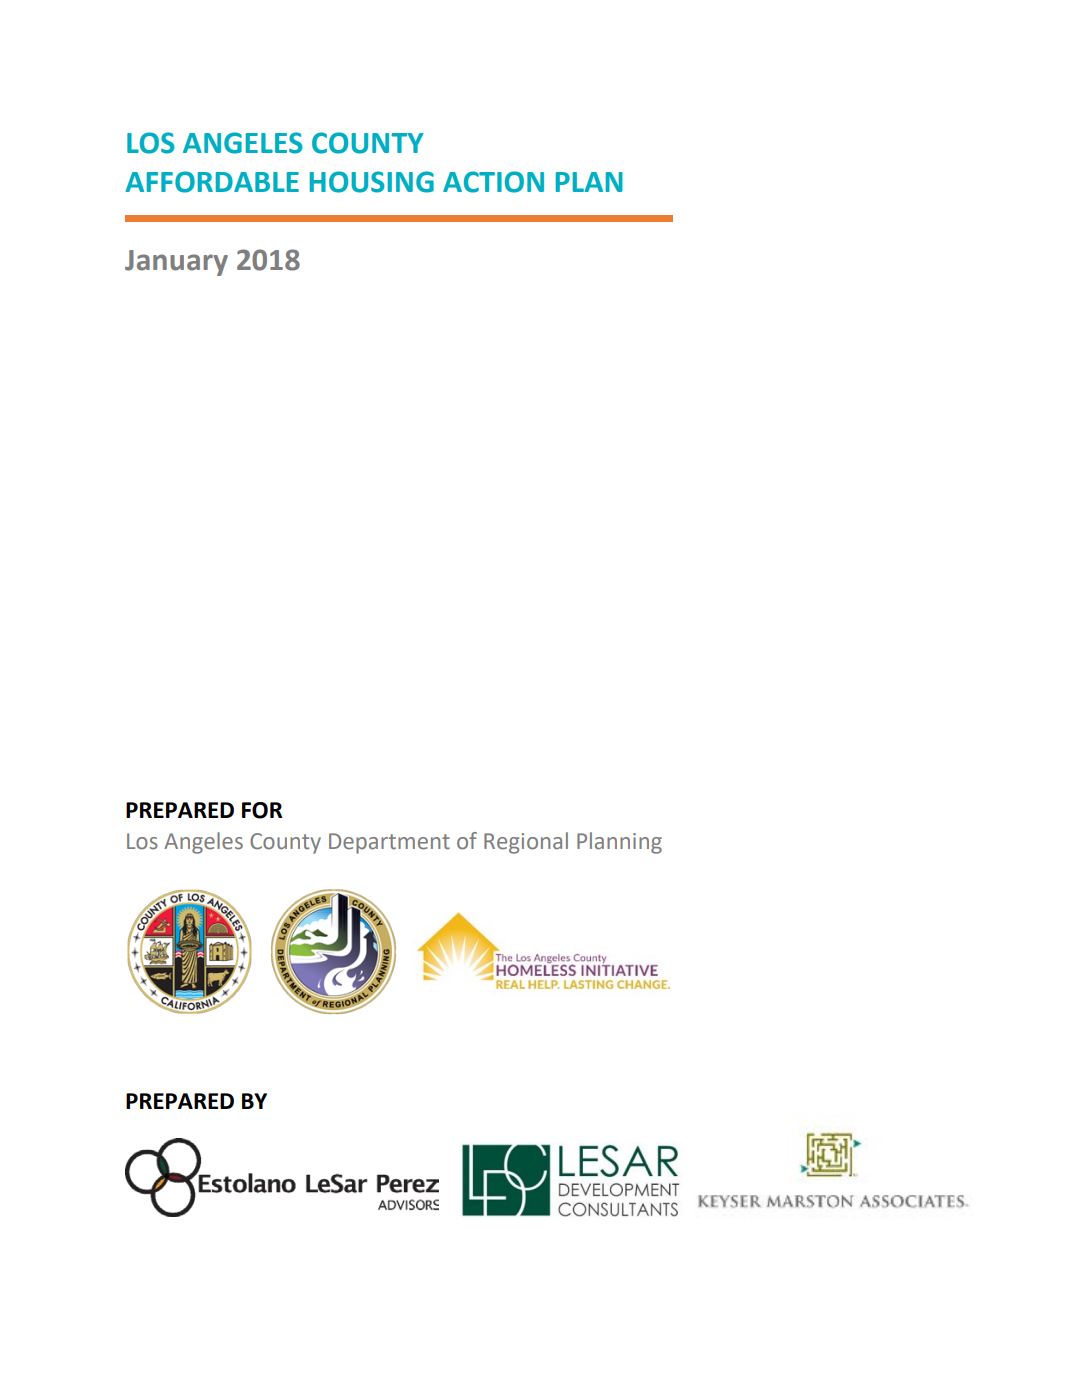 LA County#Affordable Housing Action Plan